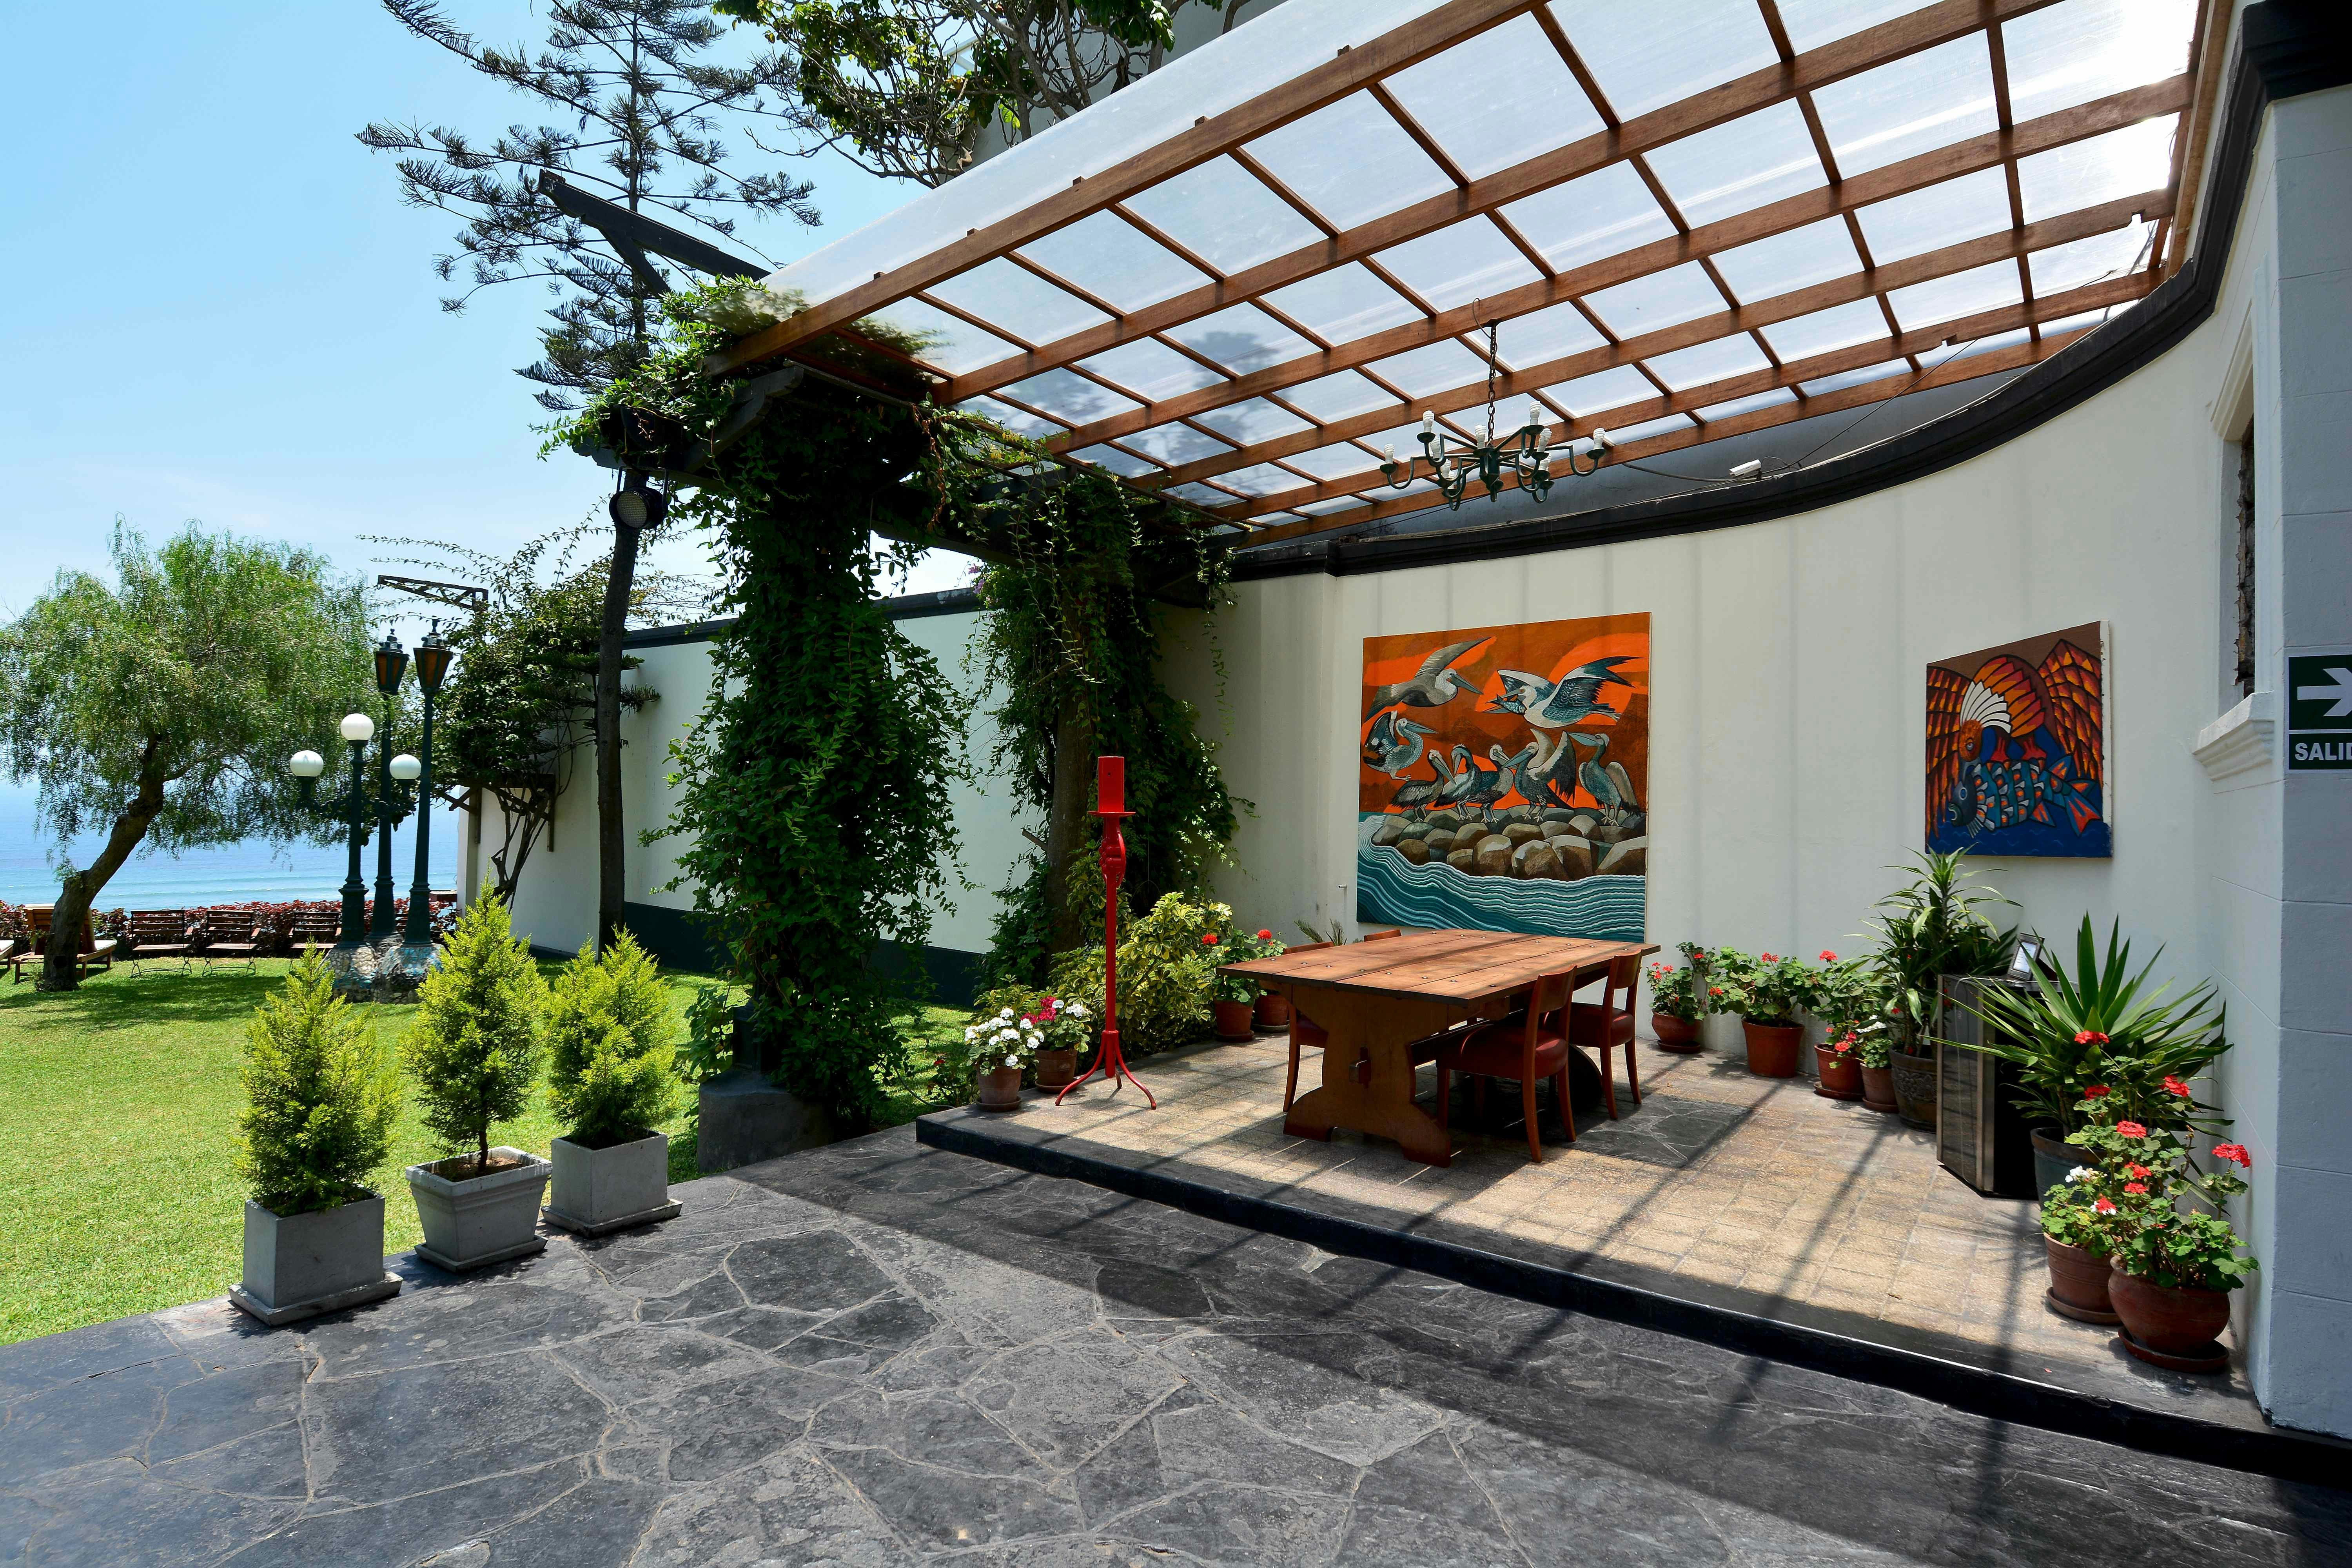 The veranda at Second Home Peru, the home of sculptor Víctor Delfín; a dining area is decorated with potted plants, and paintings hang on the exterior walls.